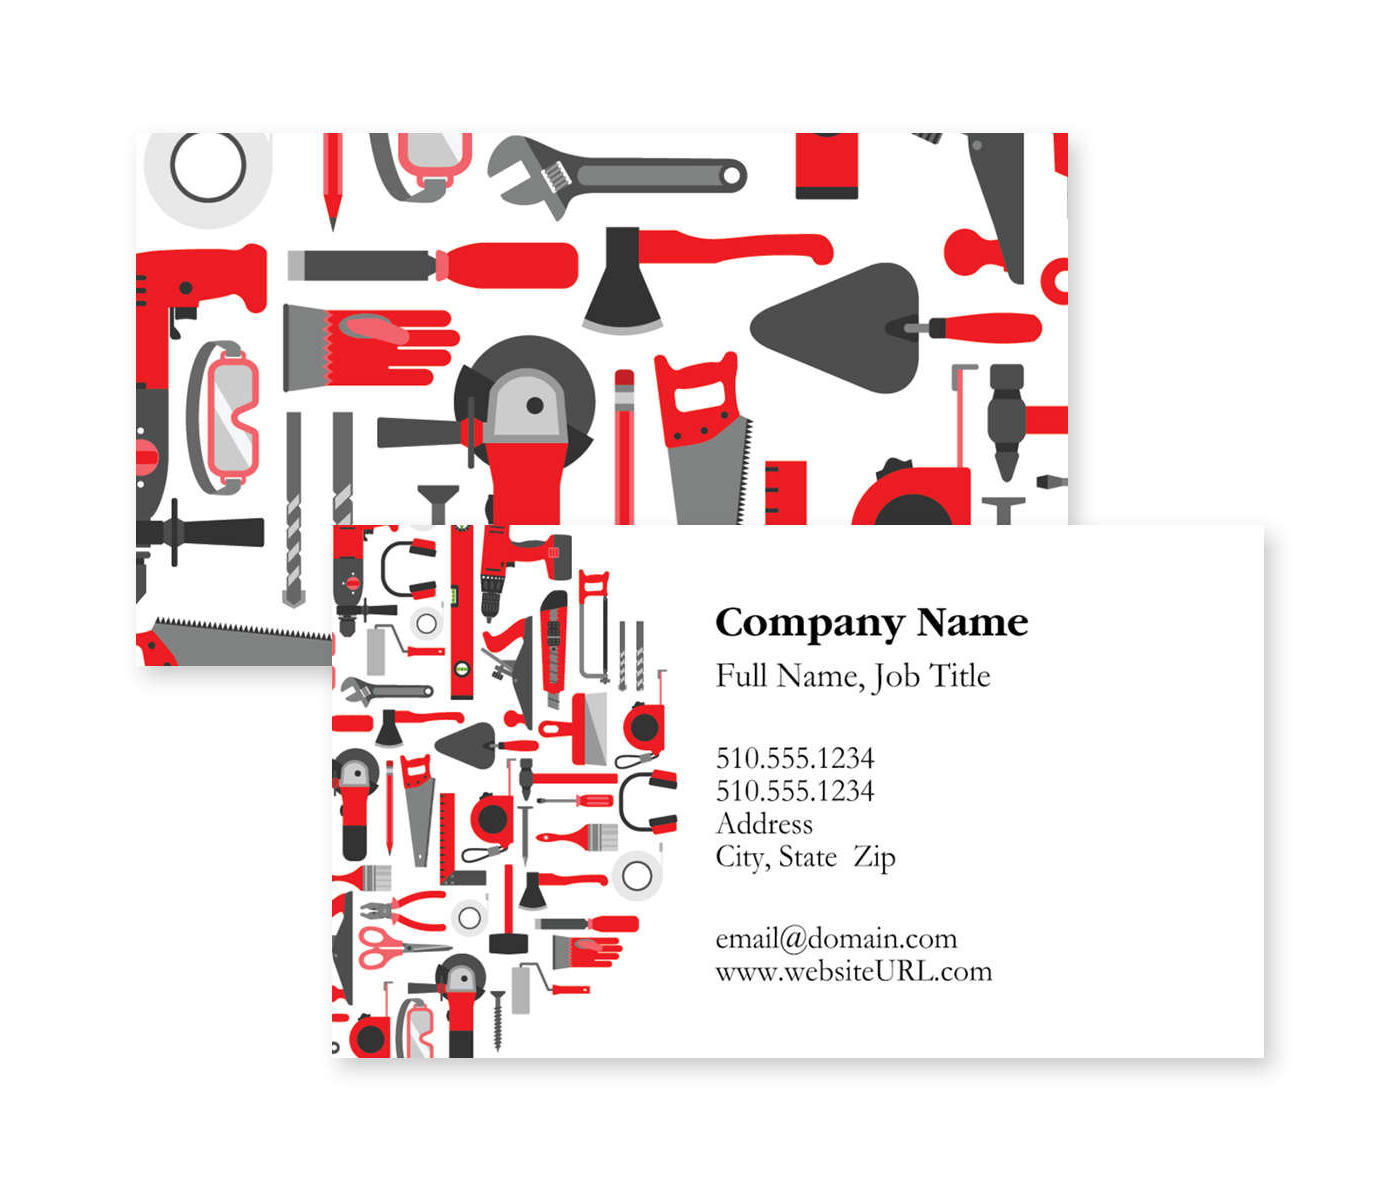 Tools of the Trade Business Card 2x3-1/2 Rectangle